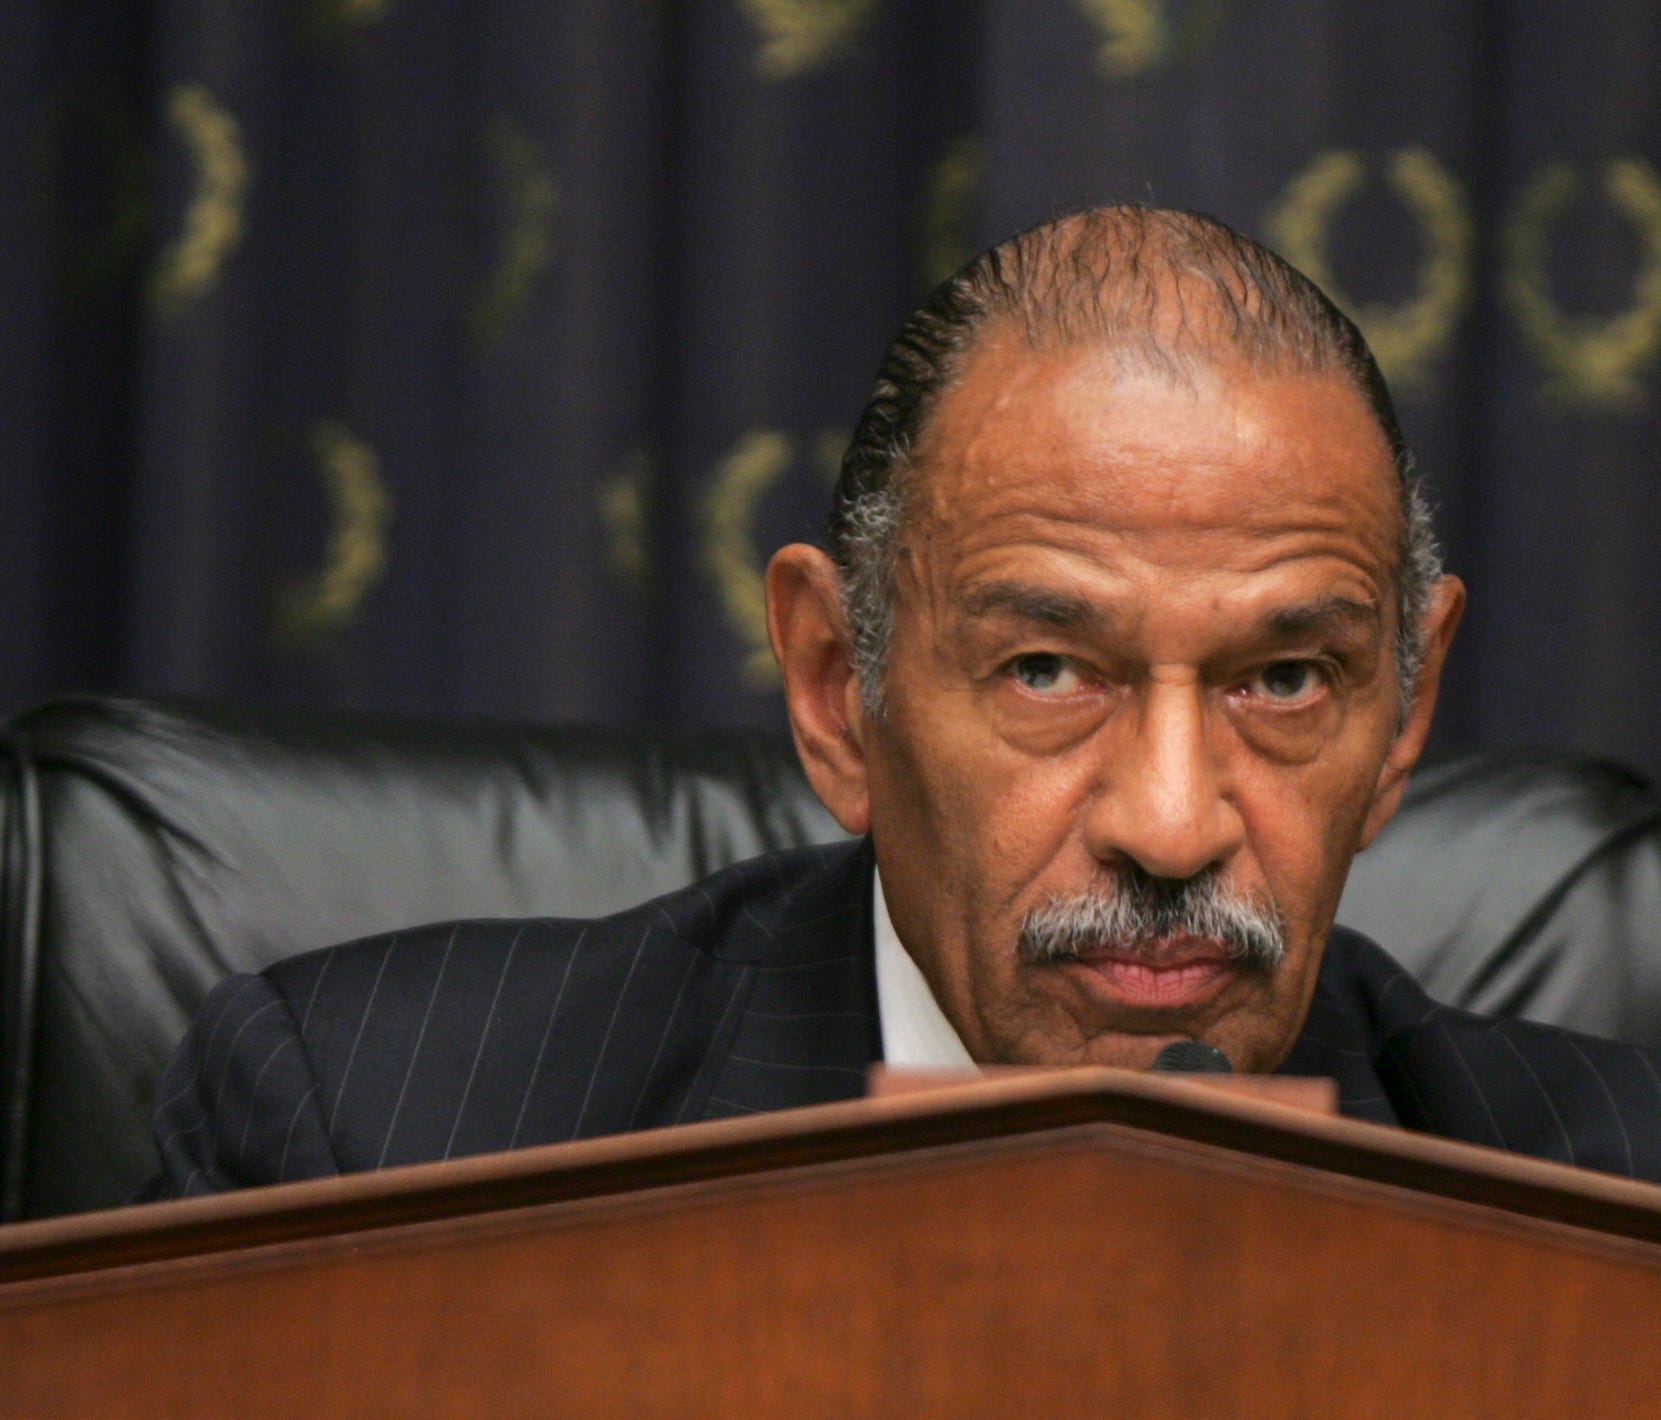 House Judiciary Committee Chairman Rep. John Conyers, D-Mich. listens as former Justice Department White House liaison Monica Goodling testified before the committee on Capitol Hill in Washington, Wednesday, May 23, 2007.